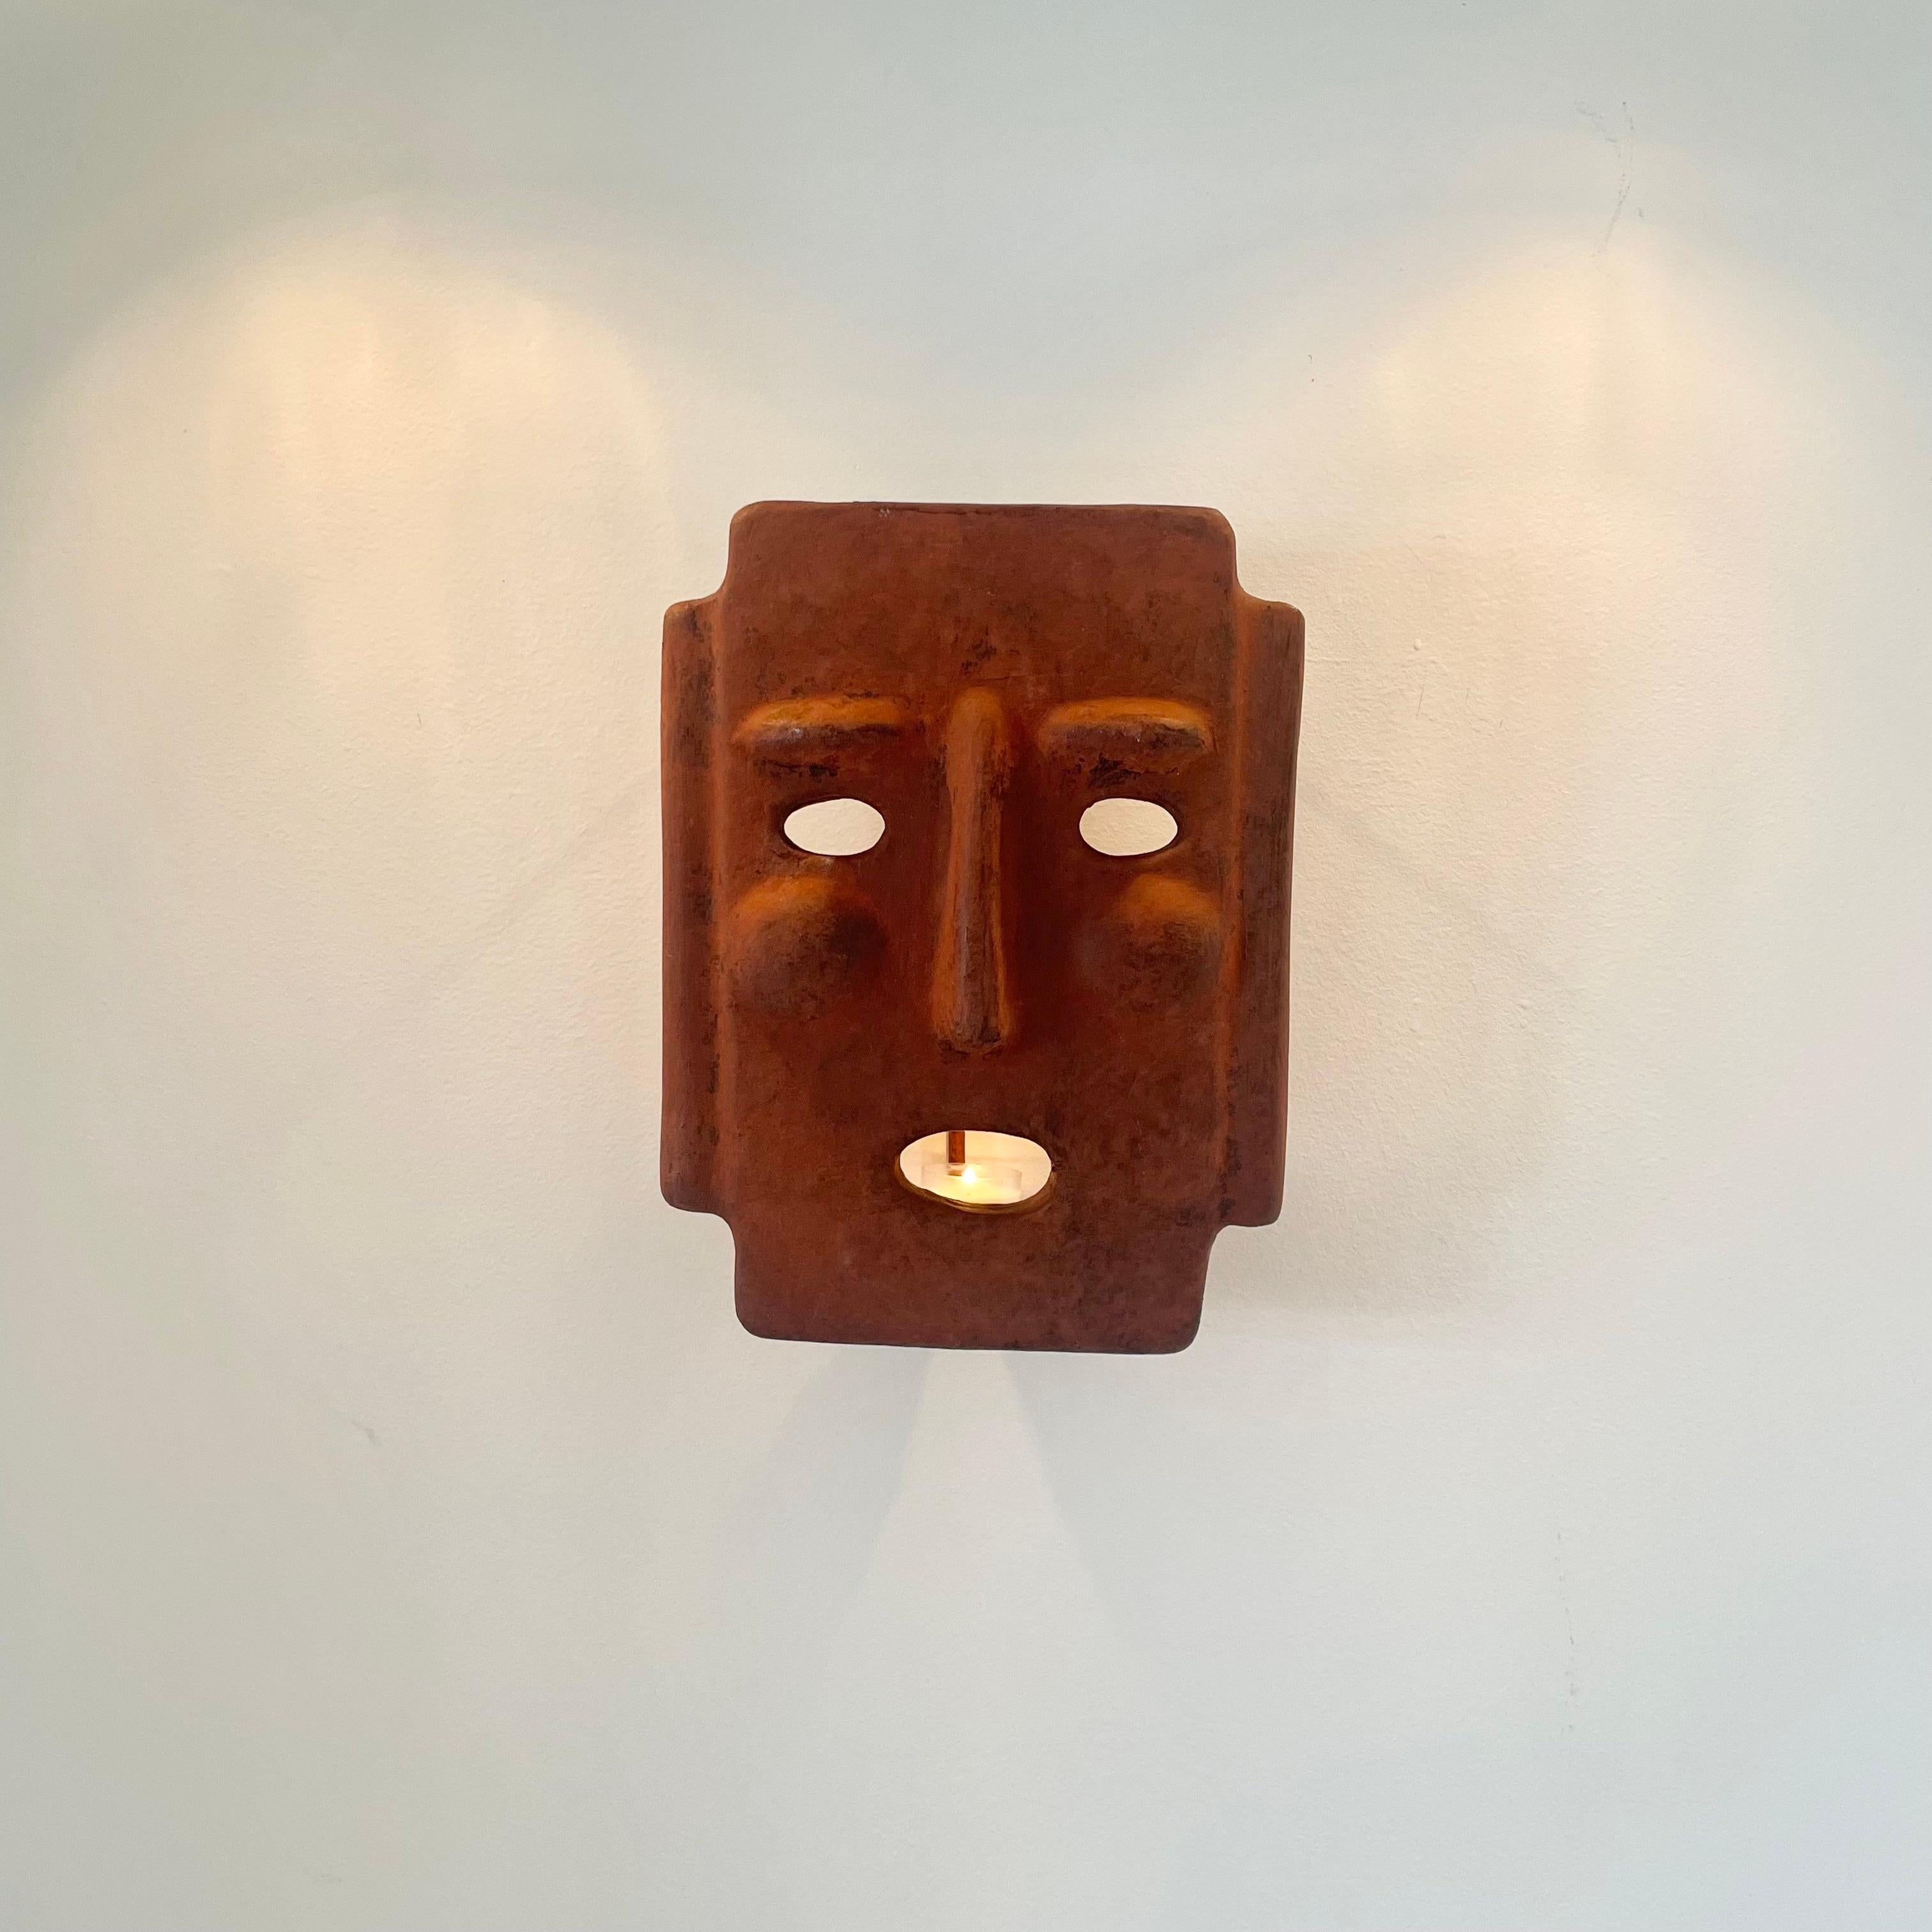 Fantastic sculptural clay mask candle sconce made in Italy. Hand made in an aged adobe color with a place for a single candle inside. Mask has a metal frame which gives the piece a nice depth from the wall and provides a surface for the candle to